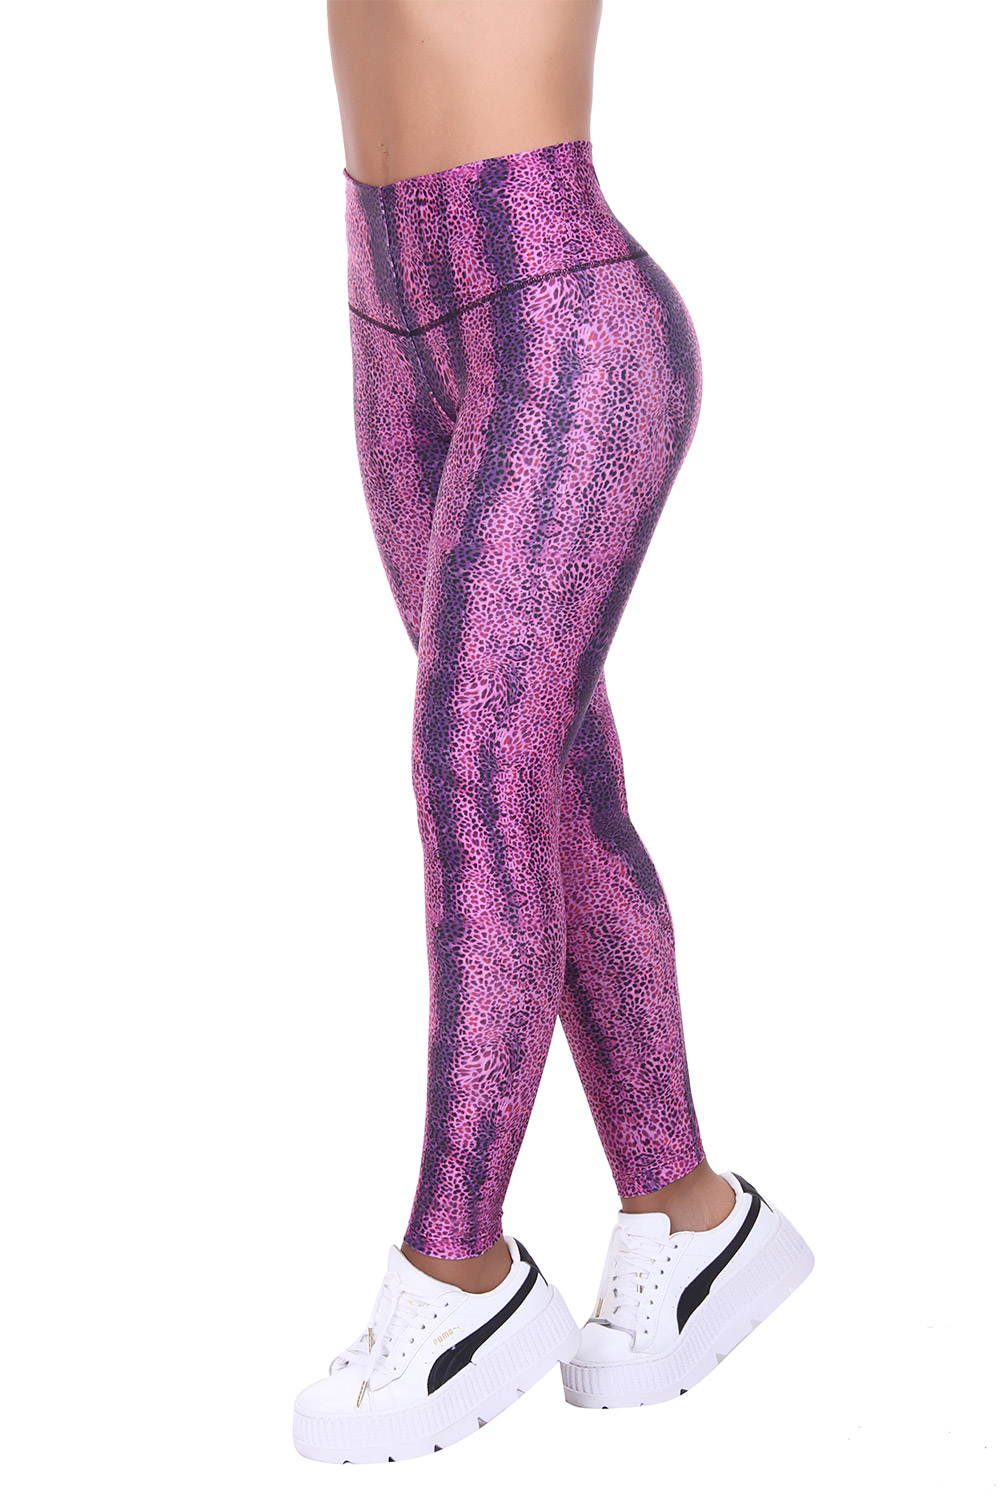 Bon Bon Up Women’s Colorful Leggings with Internal Shaper and Butt Lifter, Various Styles